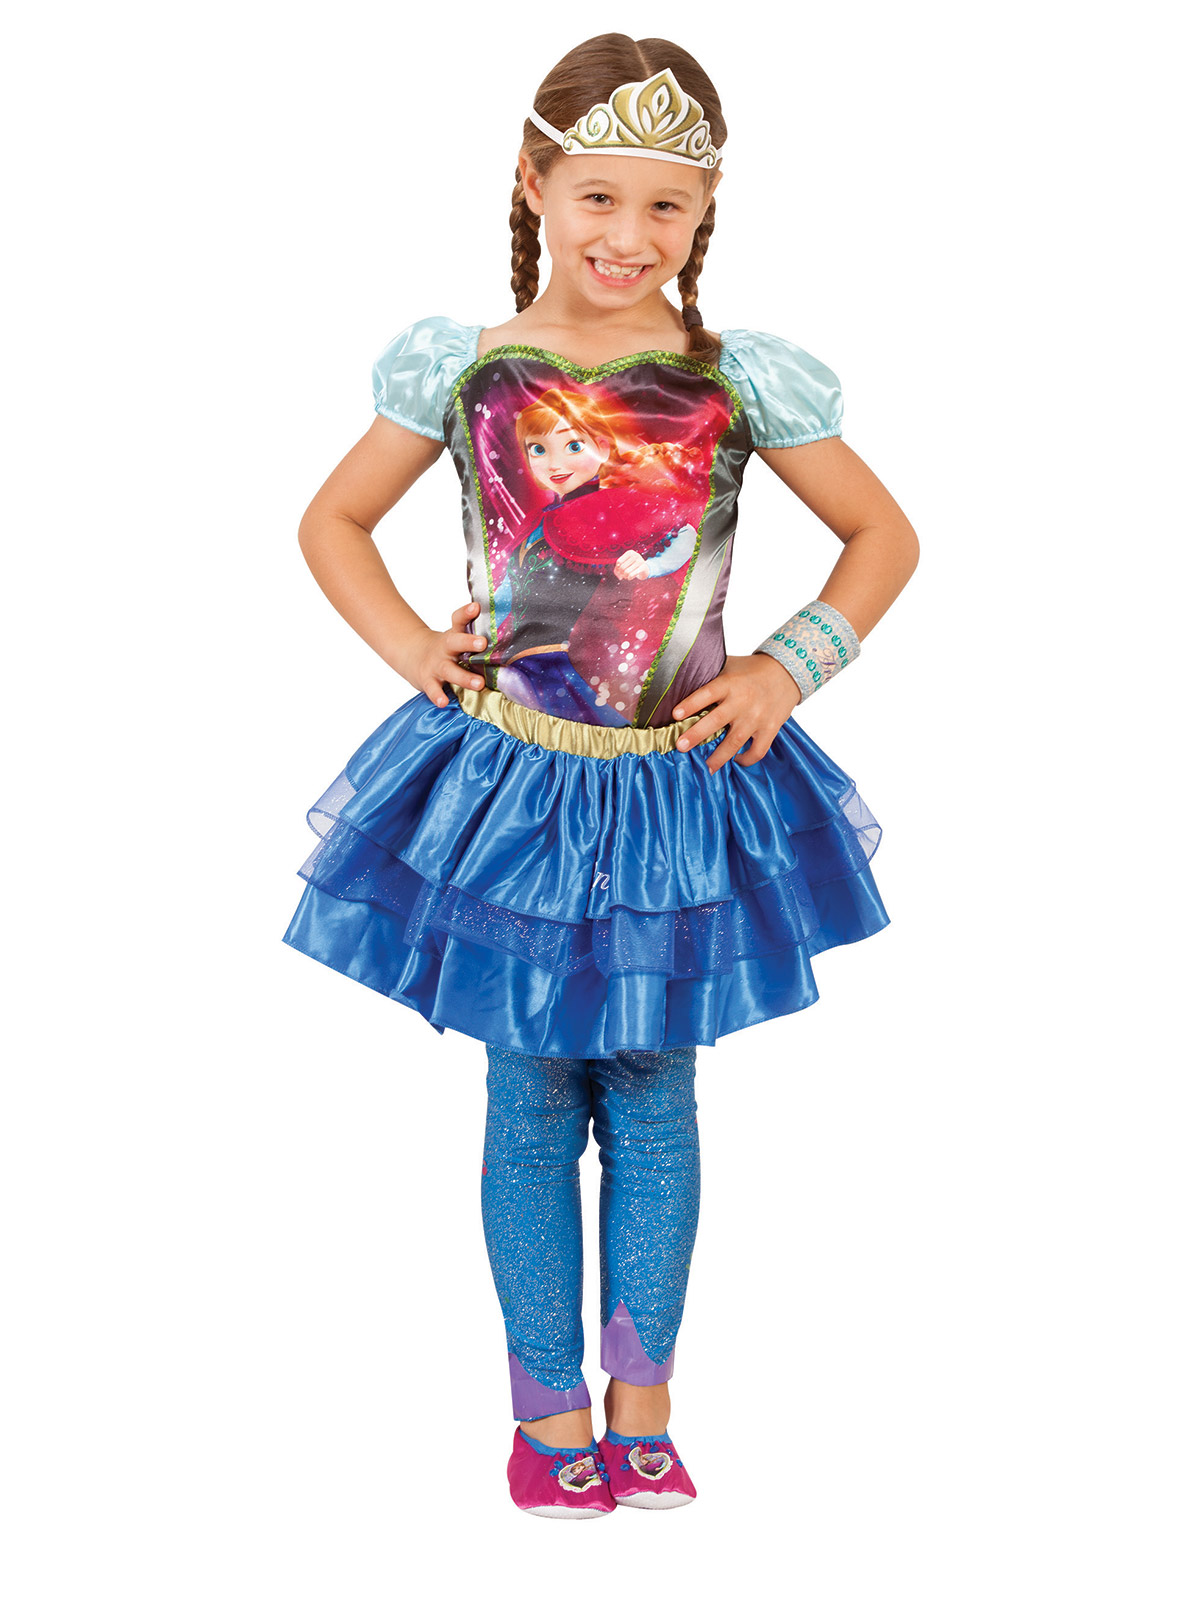 ANNA FOOTLESS TIGHTS, CHILD 1414 | Costume Party Supplies I Your One ...